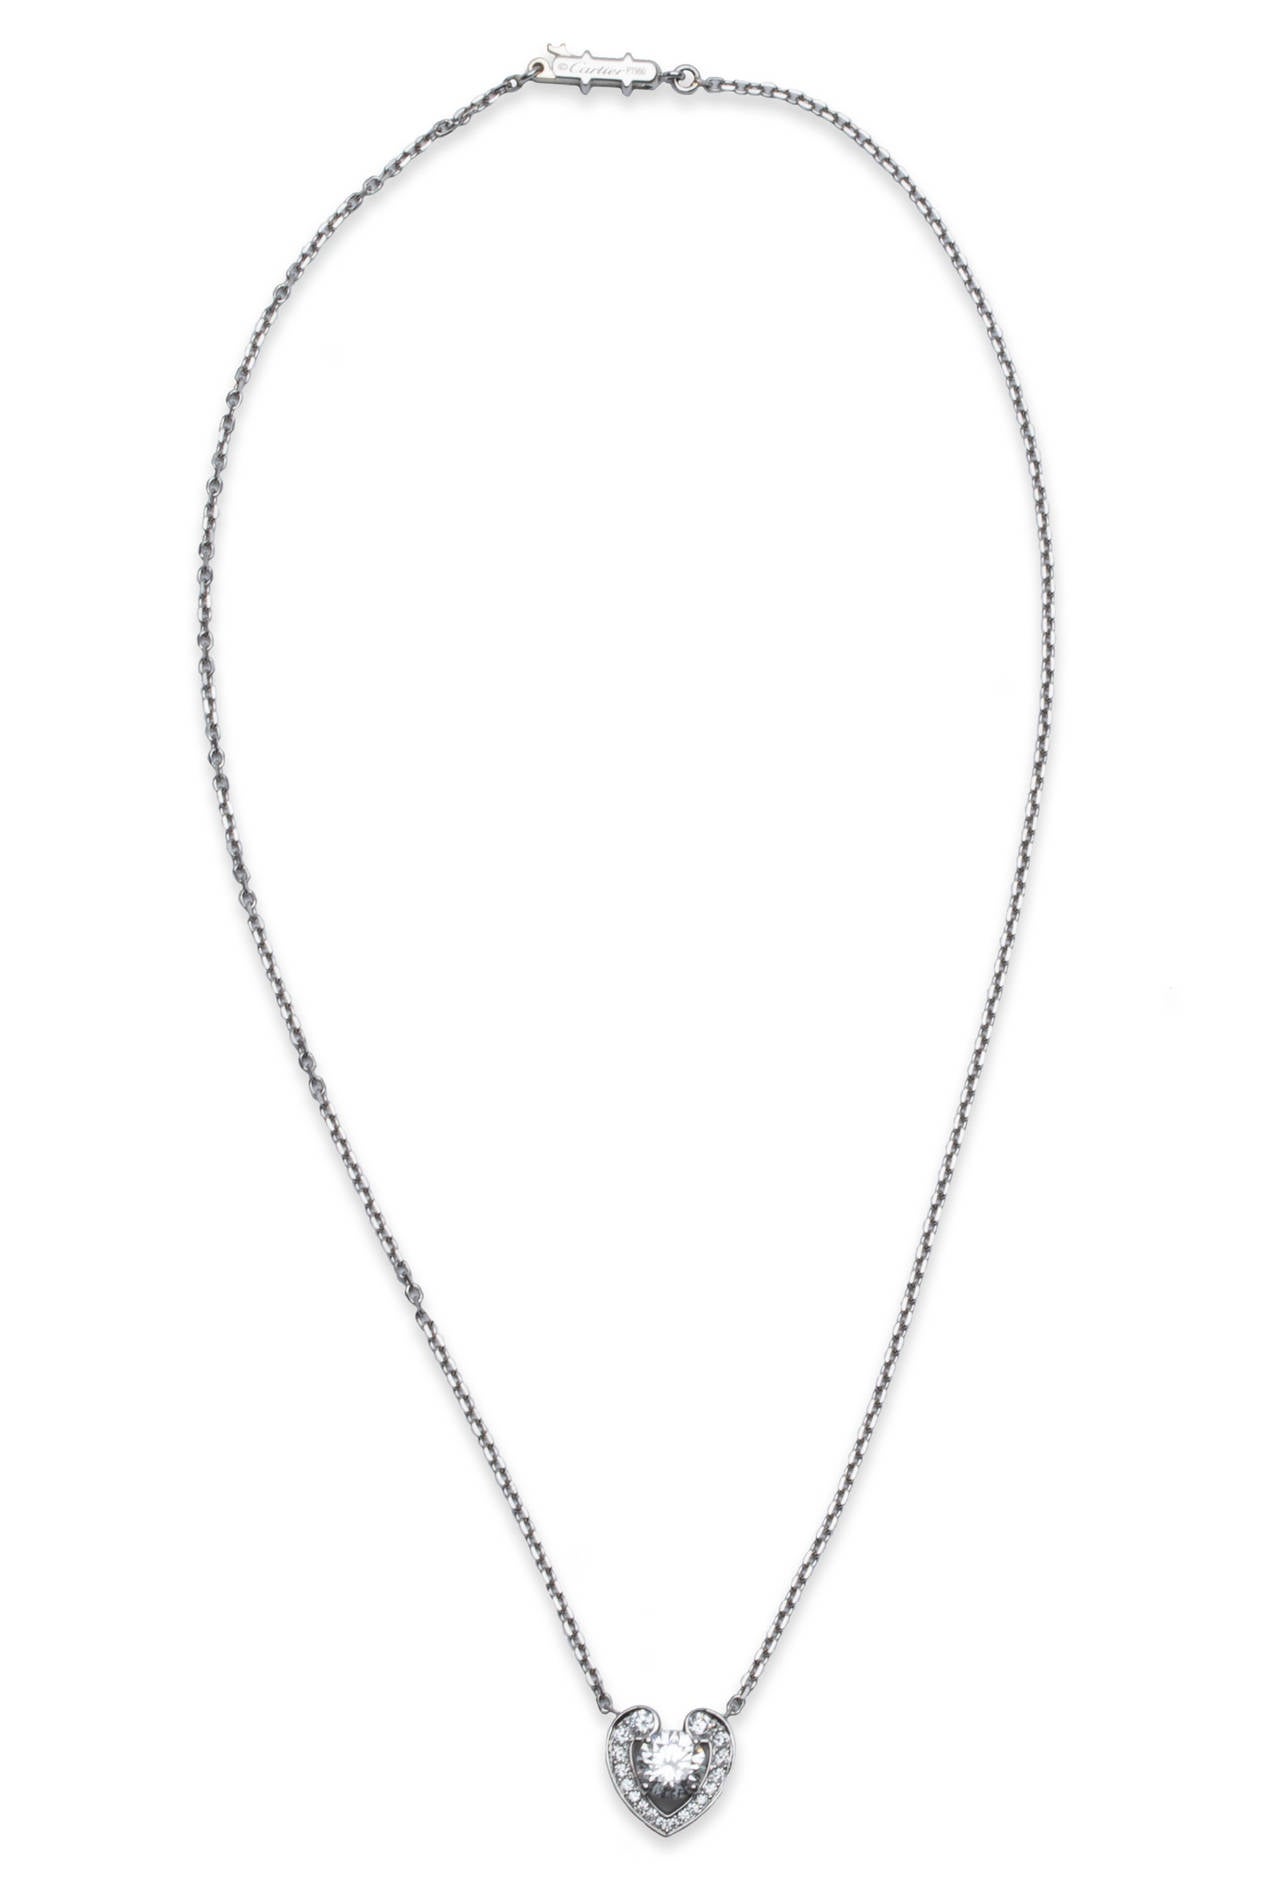 Cartier Diamond Heart Necklace in Platinum. Center Stone: 1.11ct F VS1, Total Diamond Weight: 1.38ct, Necklace Length: 16